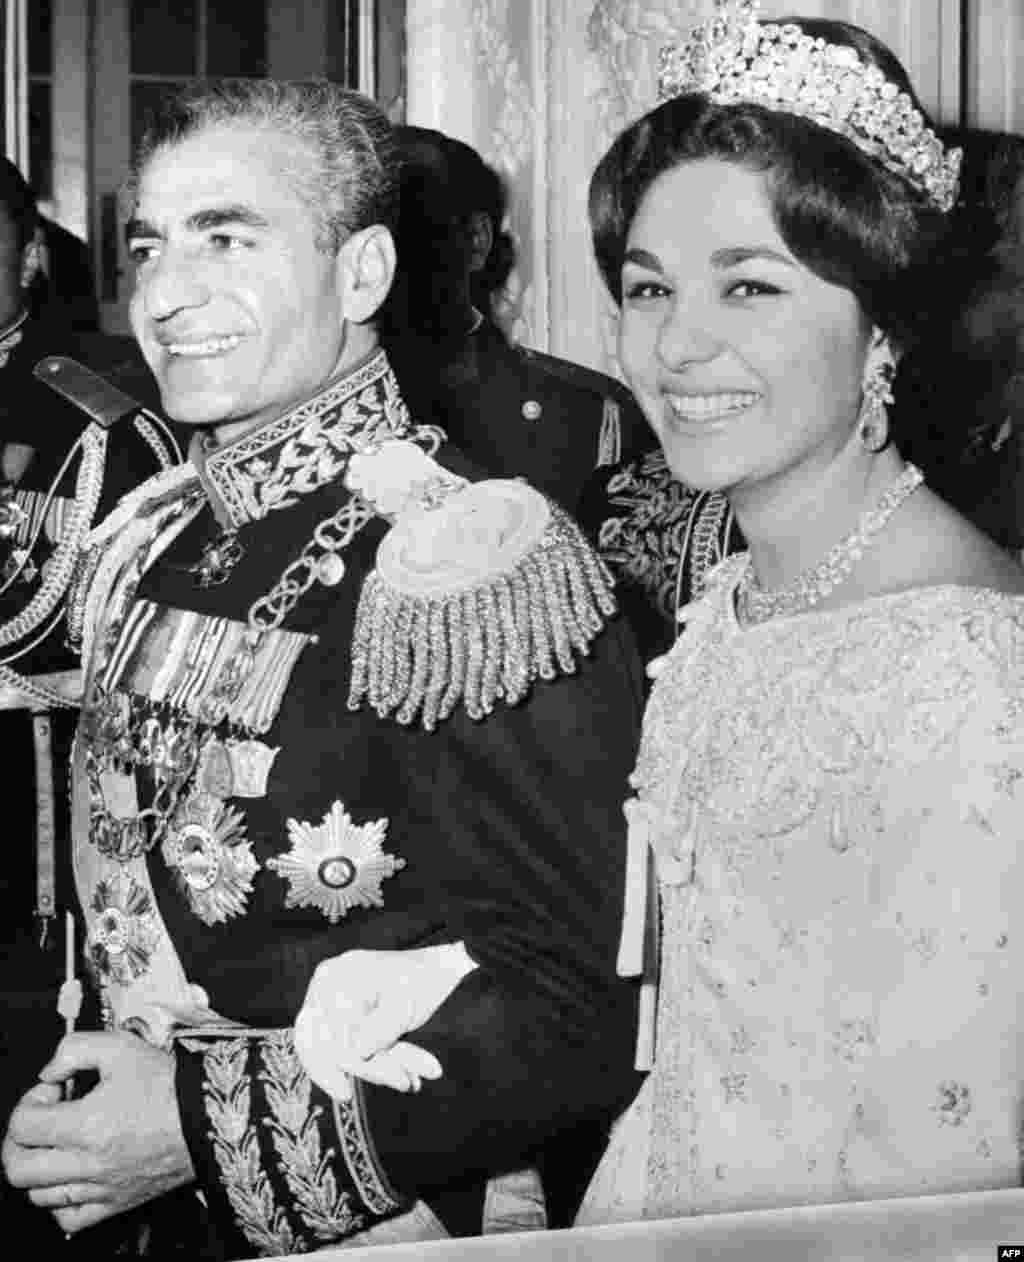 The shah of Iran, Mohammad Reza Pahlavi, and his wife, Farah (née Diba), are photographed during their wedding ceremony in Tehran on December 21, 1959.&nbsp;